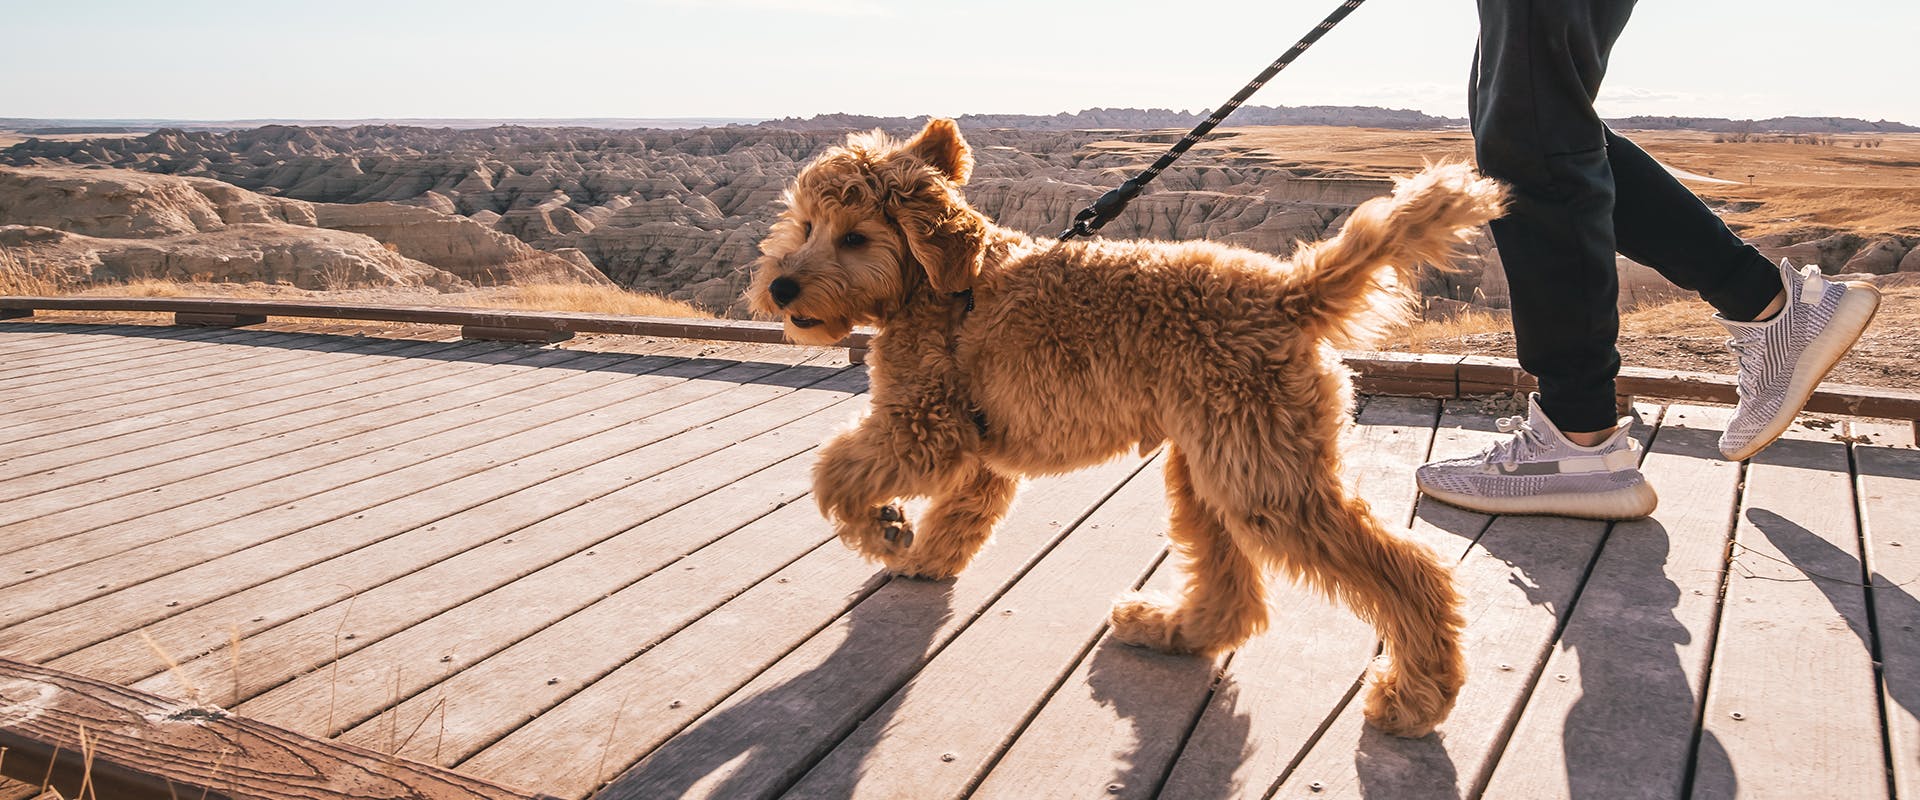 A person walking their Goldendoodle dog